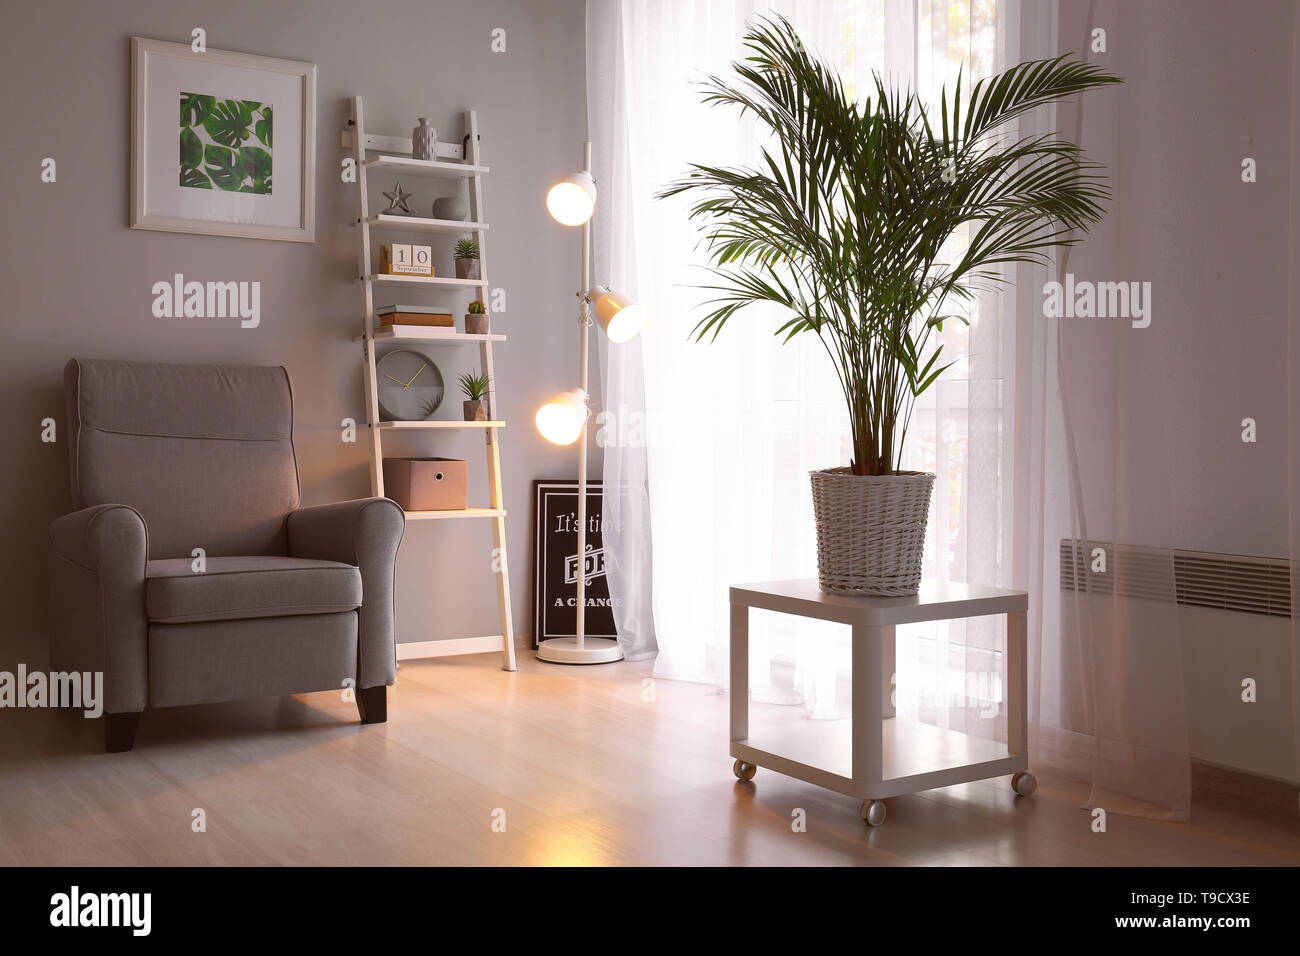 Decorative Areca palm on table in interior of room Stock Photo